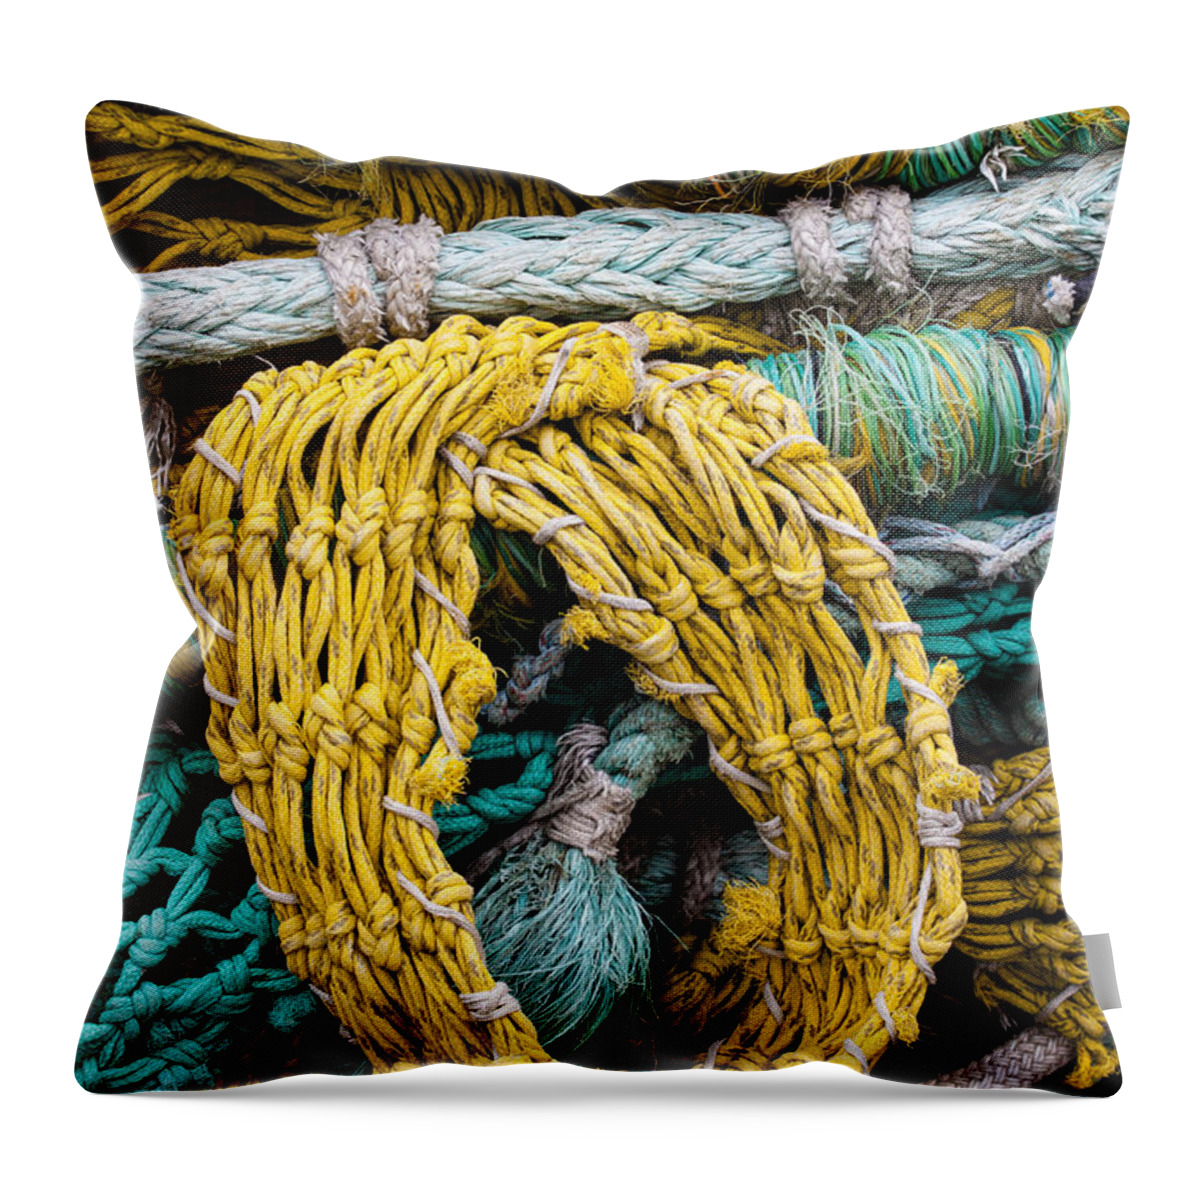 Oregon Throw Pillow featuring the photograph Colorful Fishing Nets by Carol Leigh